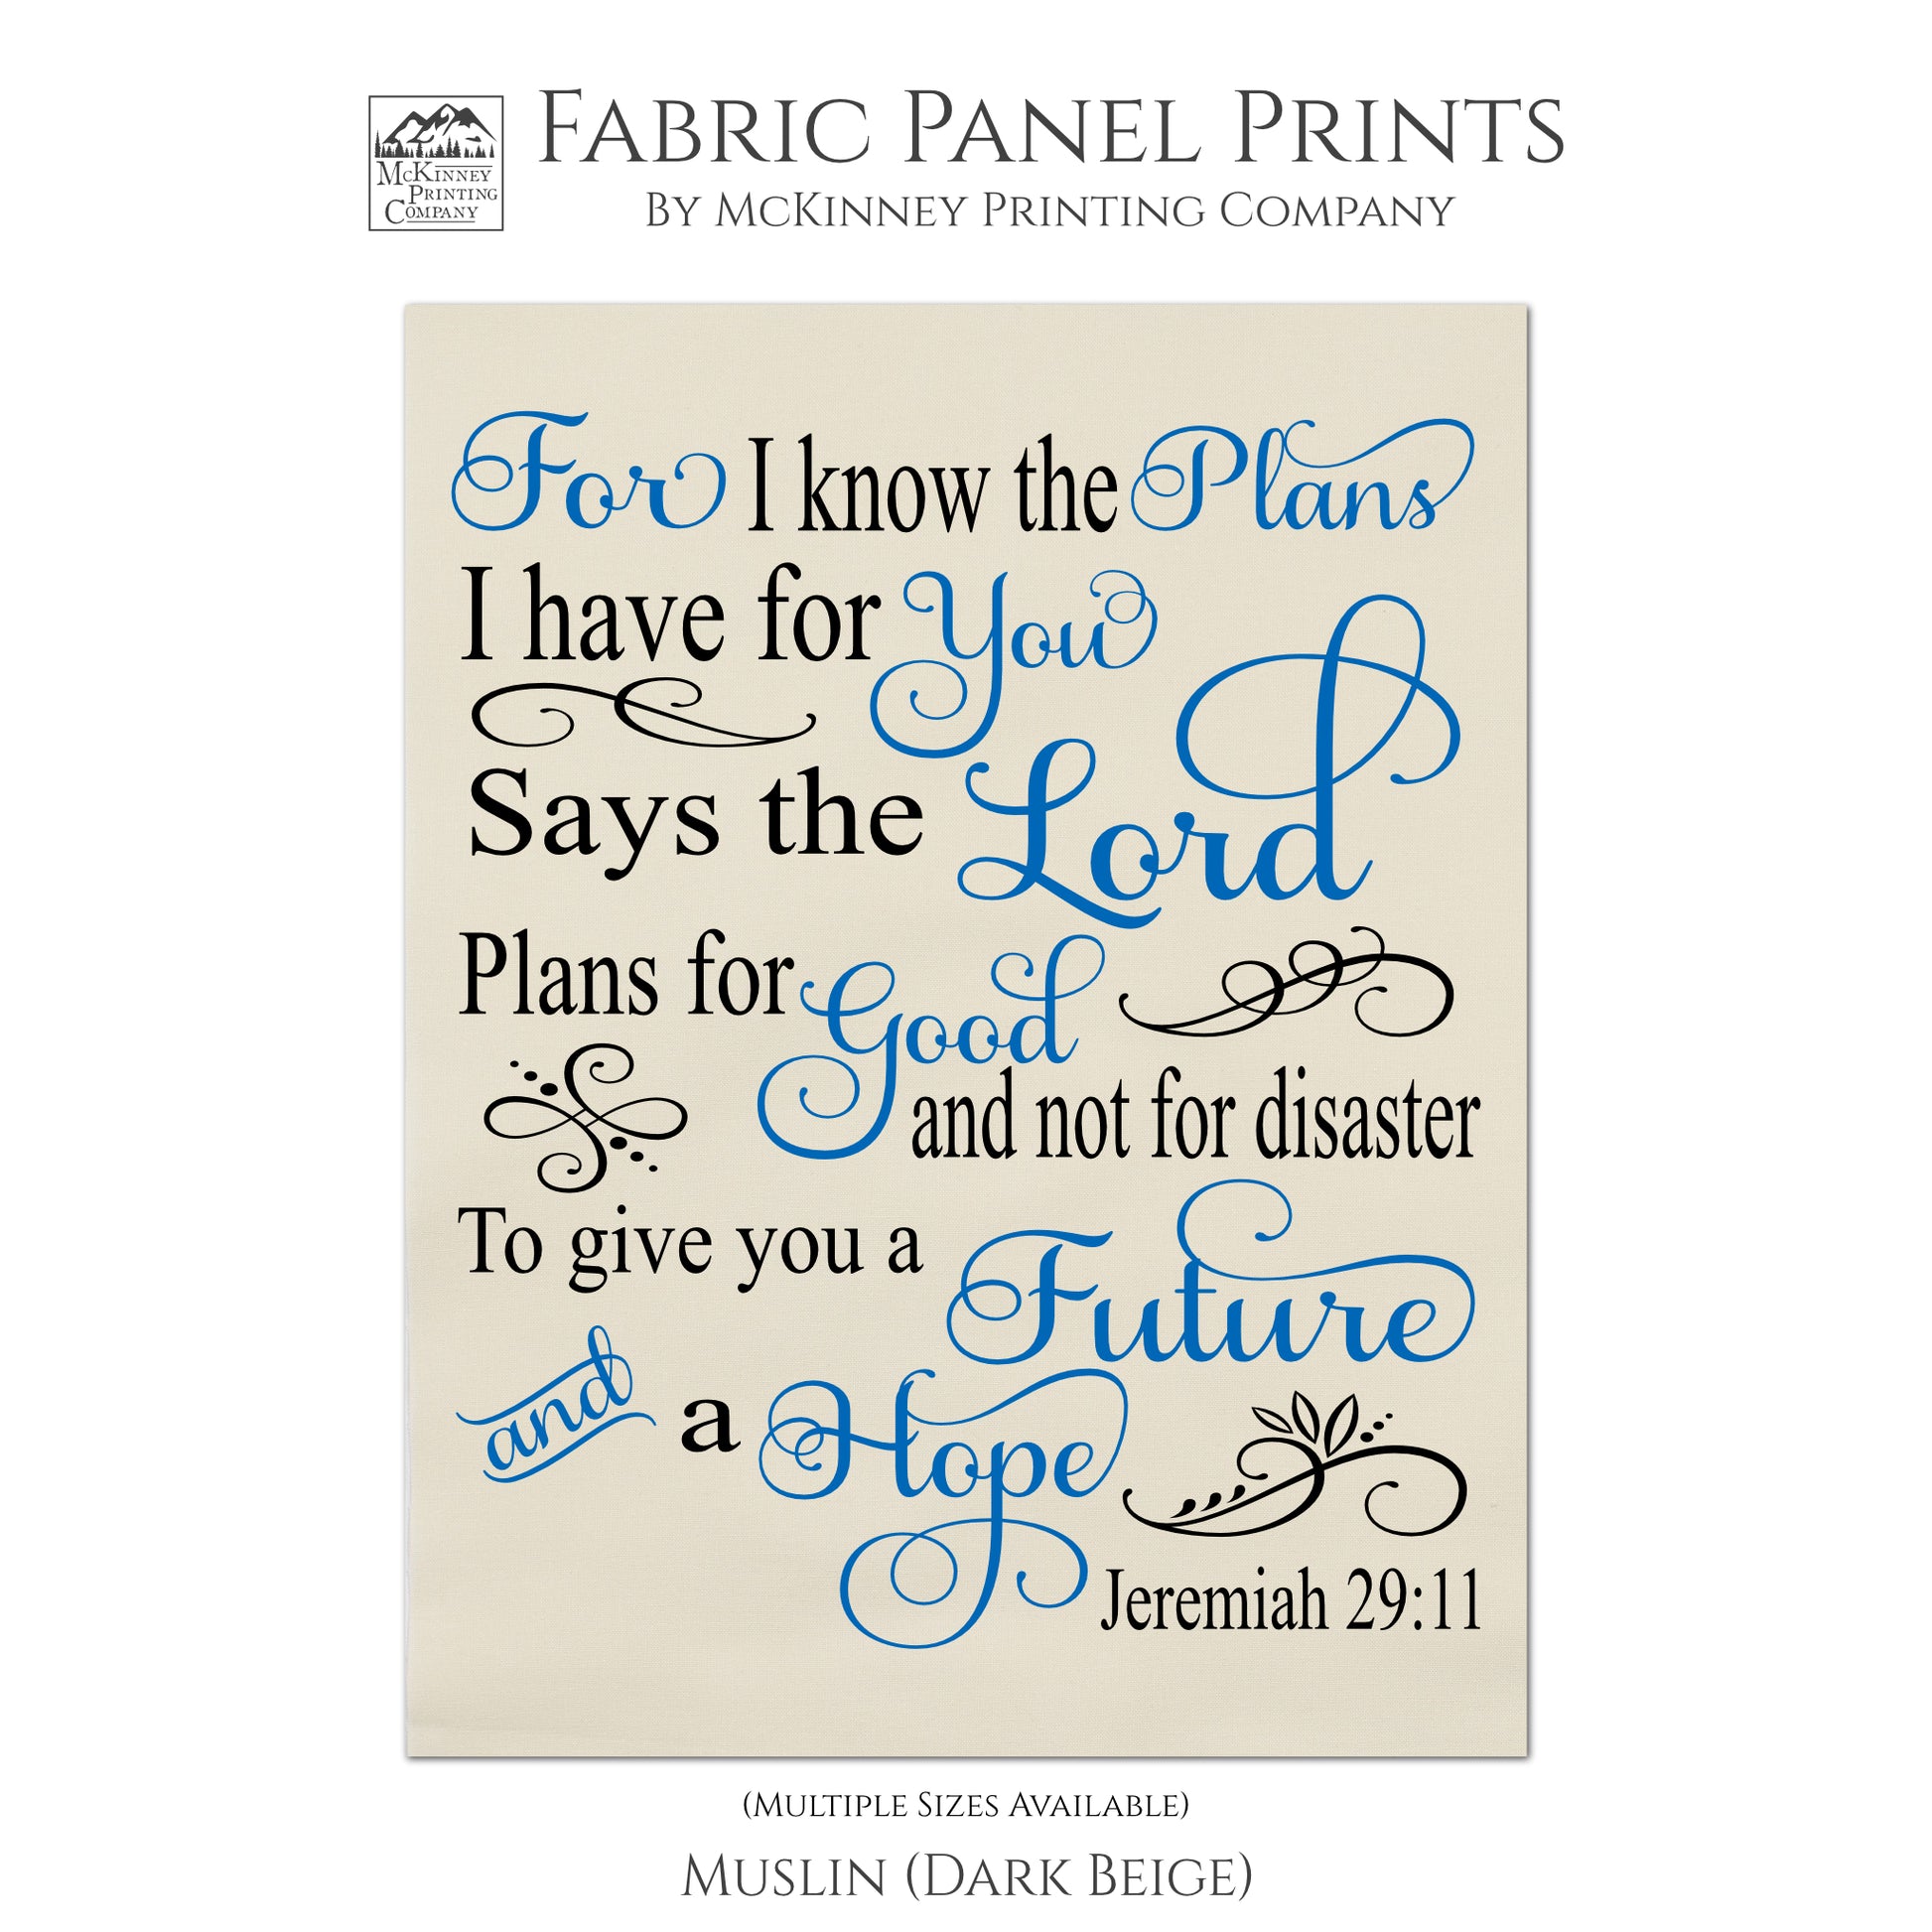 For I know the plans I have for you says the Lord. Plans for good and not for disaster. To give you a Future and a Hope. - Jeremiah 29:11, Fabric Panel Print, Quilt Block, Sewing, Craft - Muslin